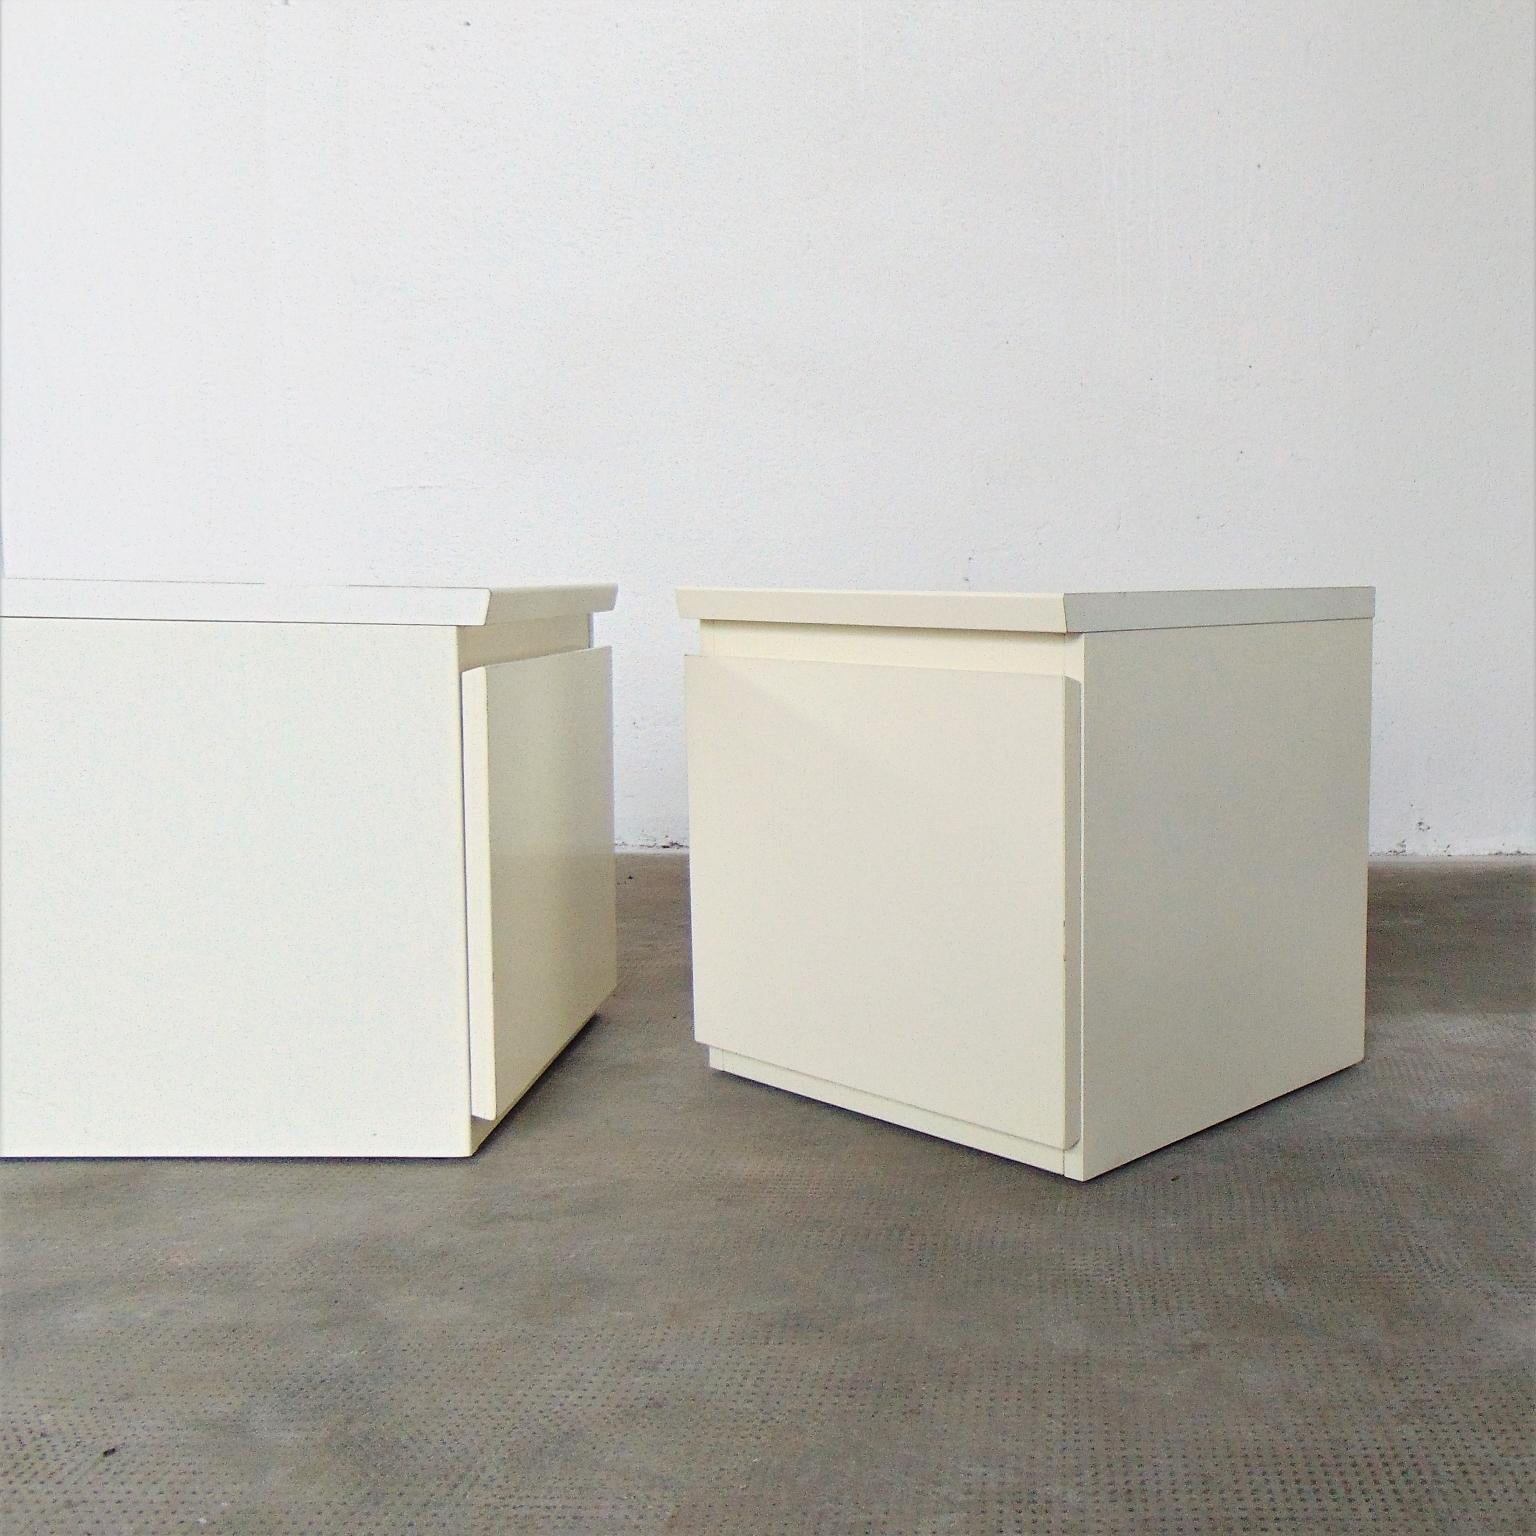 1979 Claudio Salocchi Two Low Cabinets in White Lacquer by Sormani, Italy For Sale 7